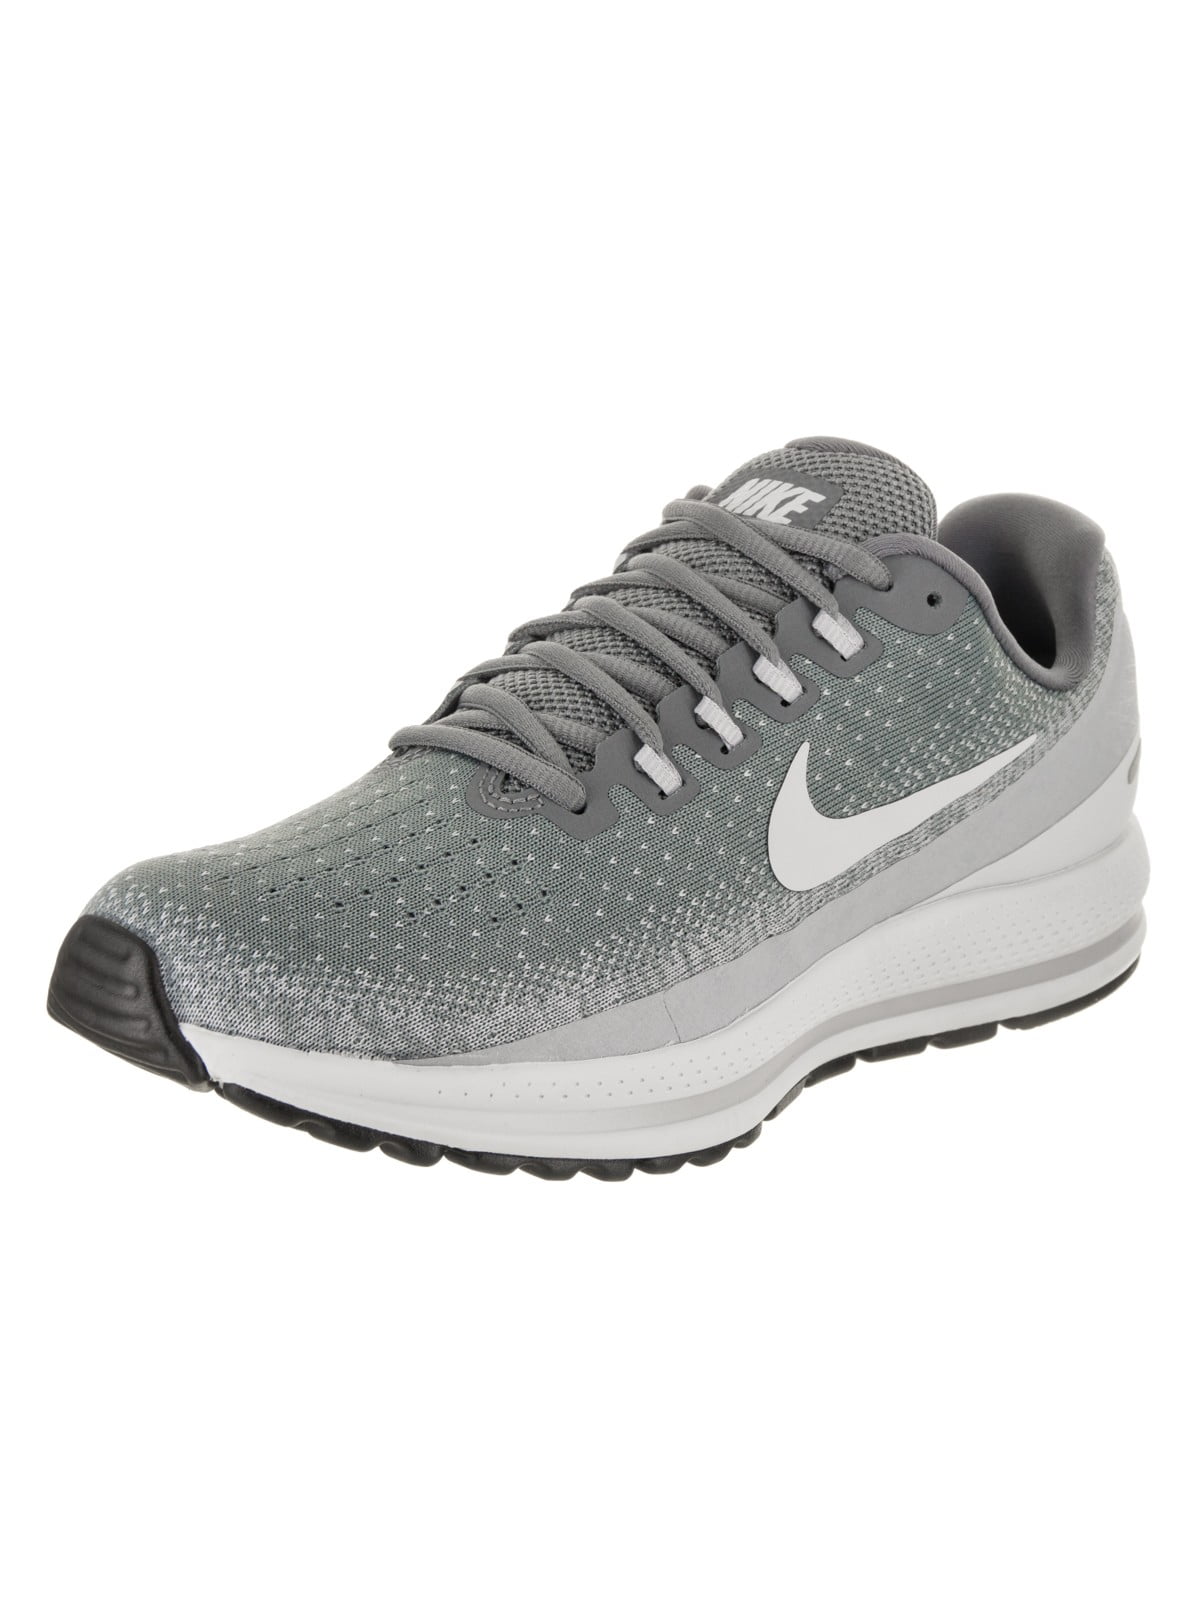 nike men's air zoom vomero 13 running shoes